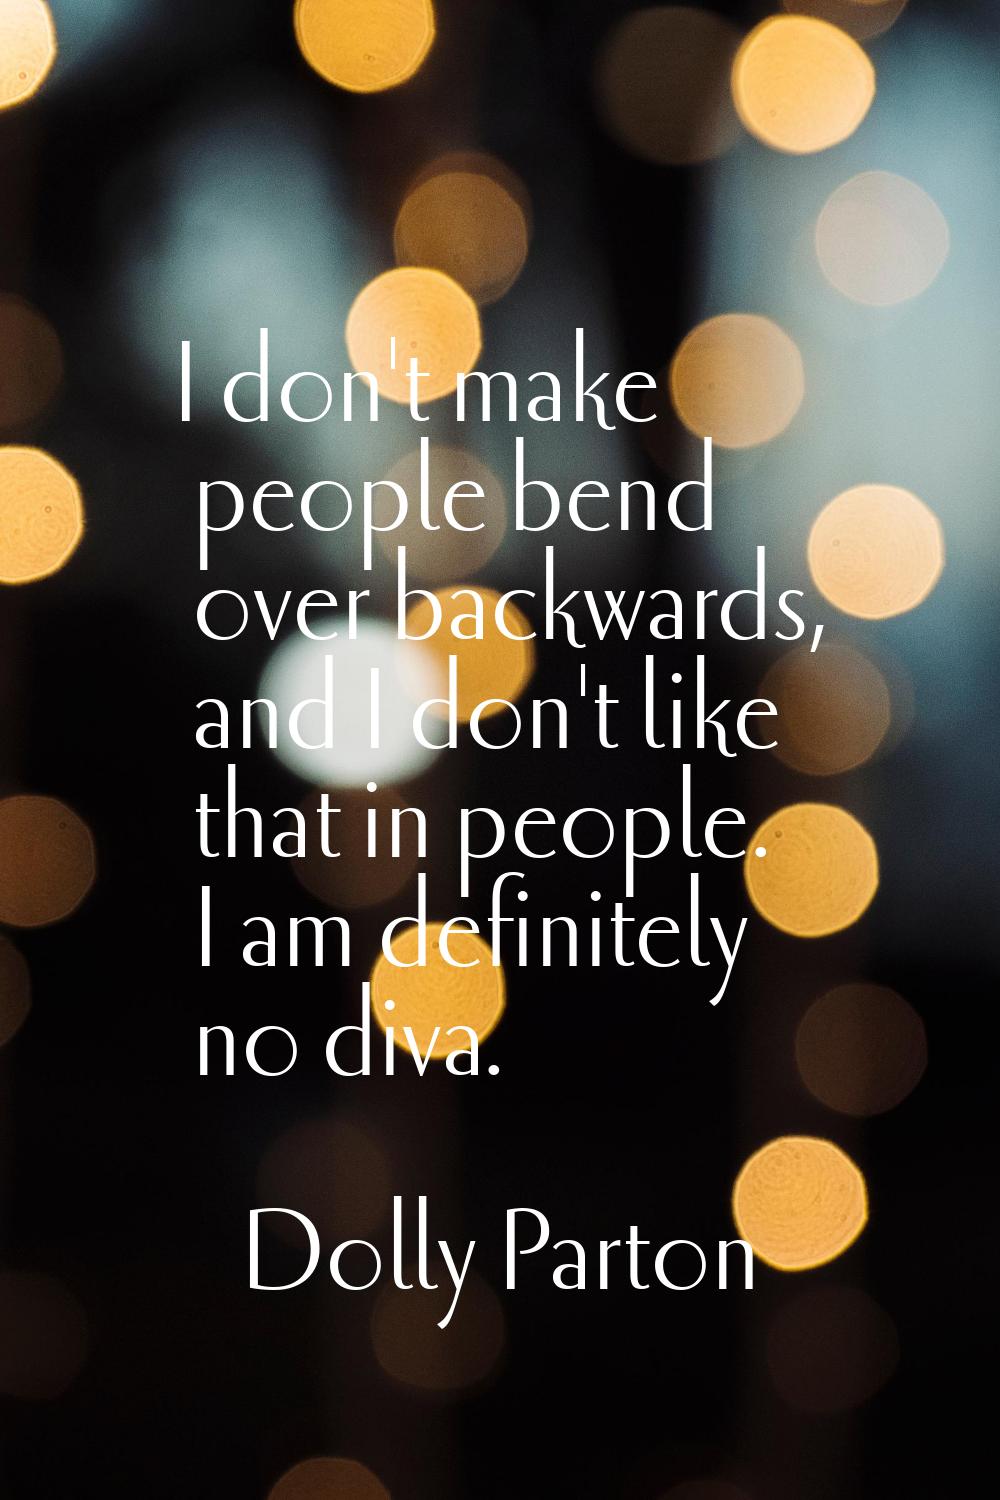 I don't make people bend over backwards, and I don't like that in people. I am definitely no diva.